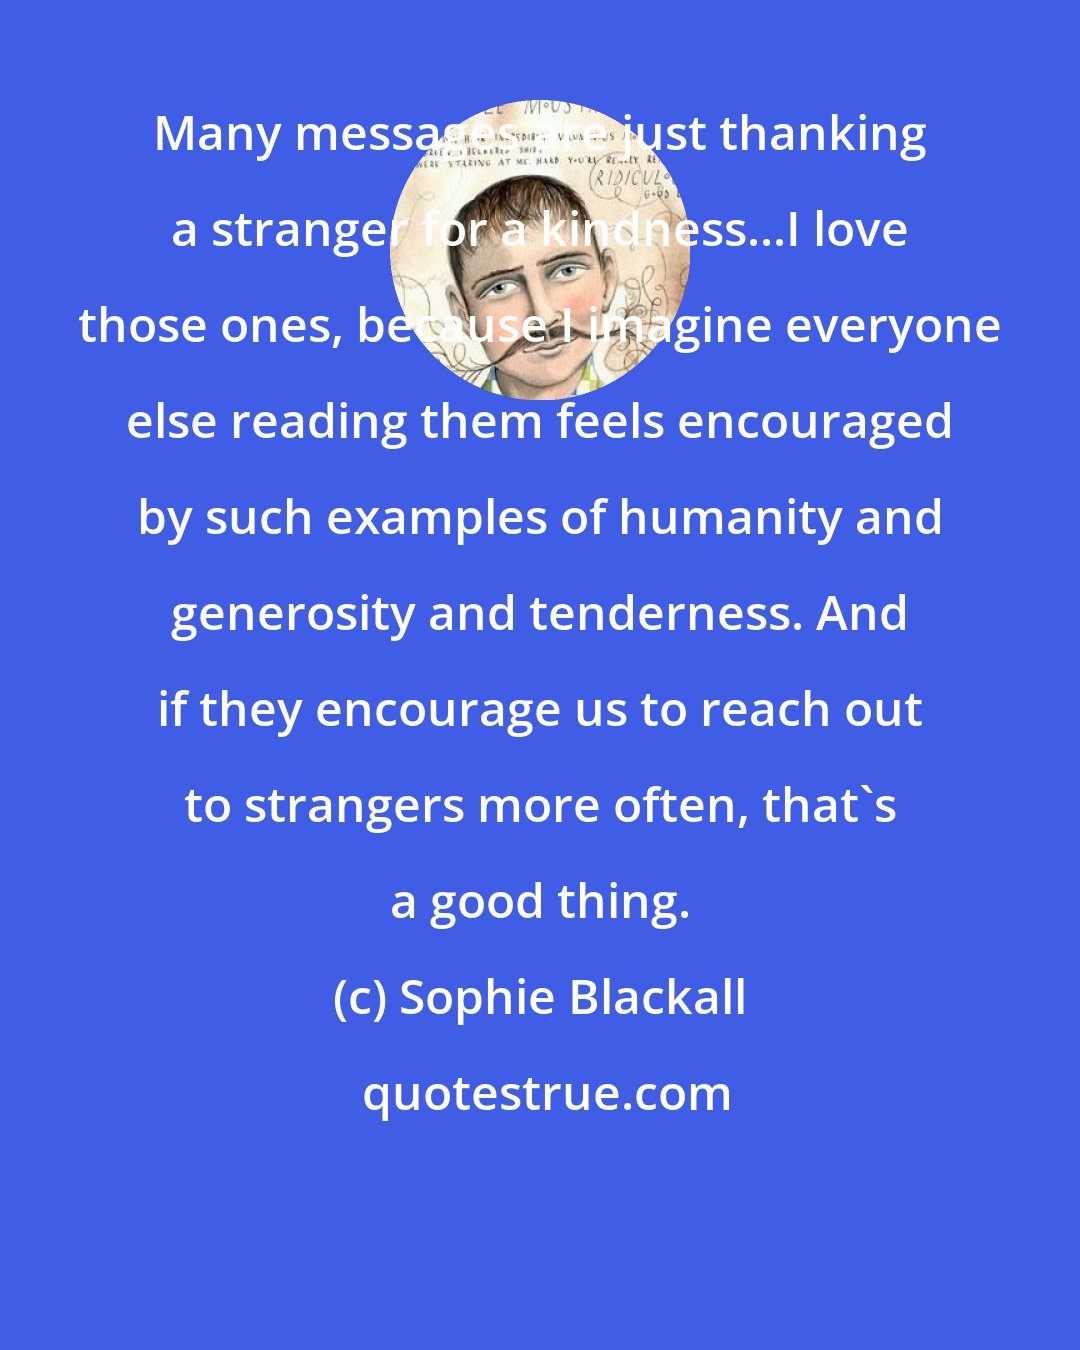 Sophie Blackall: Many messages are just thanking a stranger for a kindness...I love those ones, because I imagine everyone else reading them feels encouraged by such examples of humanity and generosity and tenderness. And if they encourage us to reach out to strangers more often, that's a good thing.